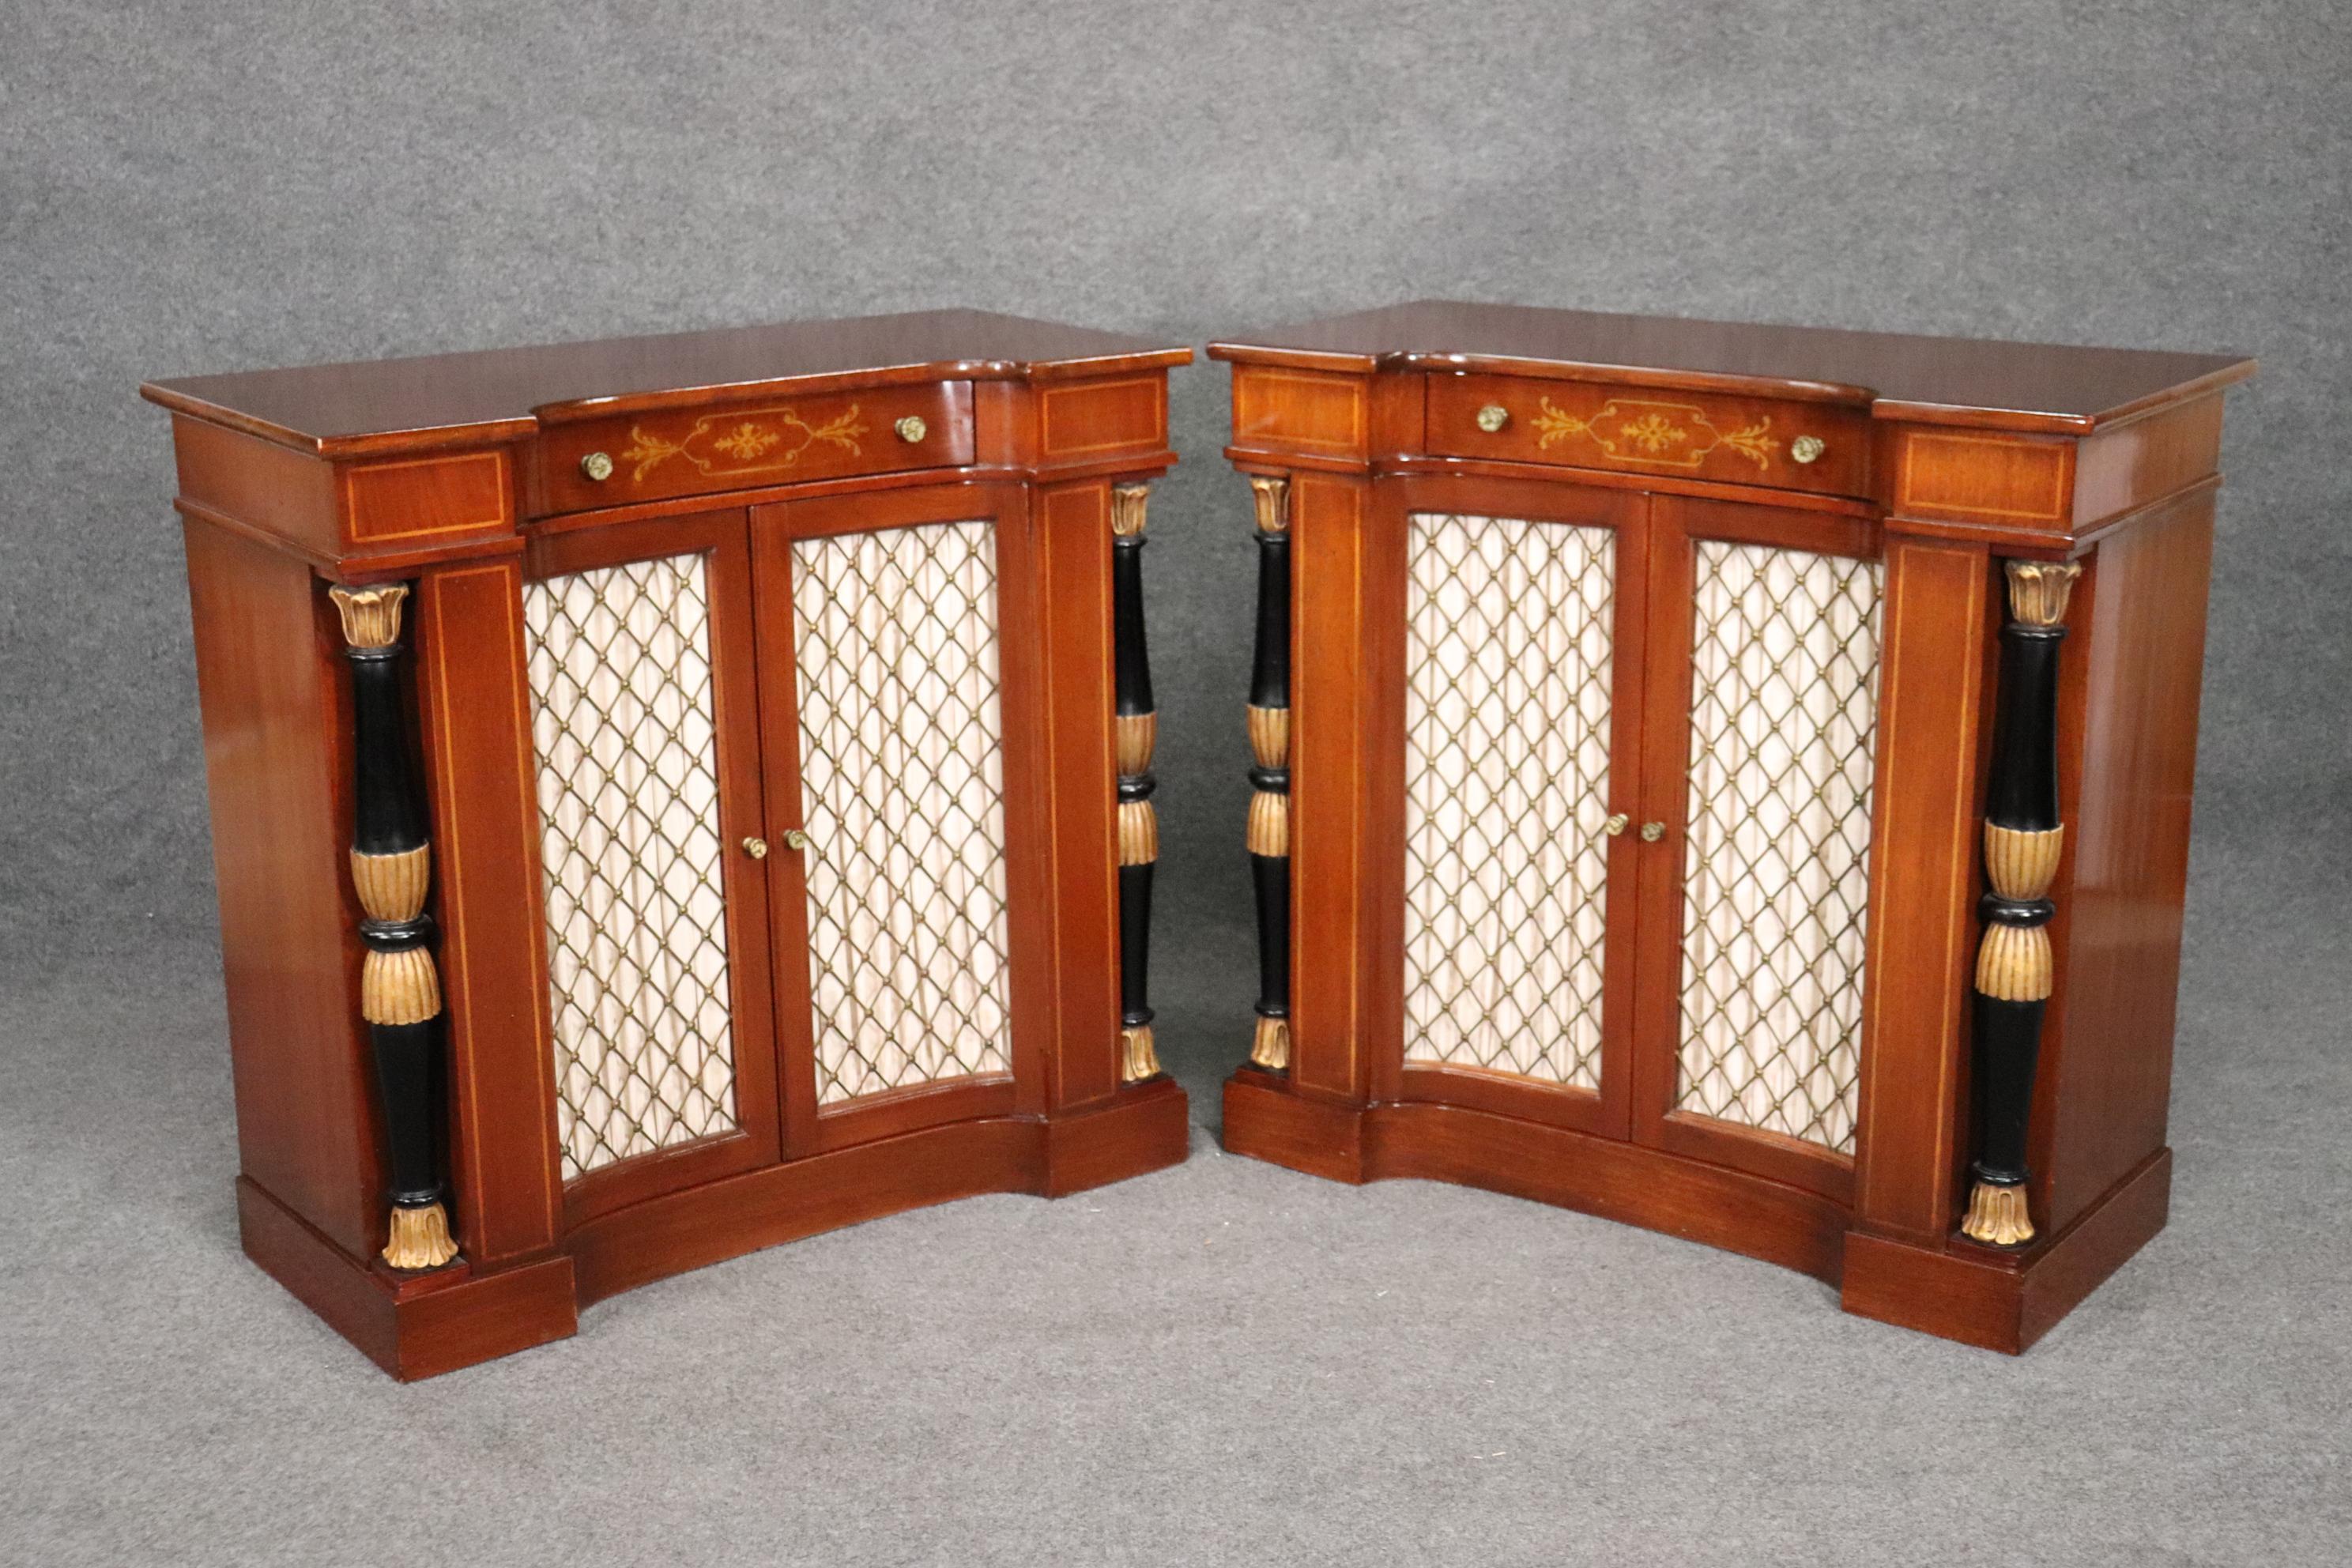 This is a beautiful pair of brass inlaid English Regency mahogany foyer cabinets. They measure 37 tall x 17 deep x 36 tall. They are in good condition with minor age related wear and signs of use.